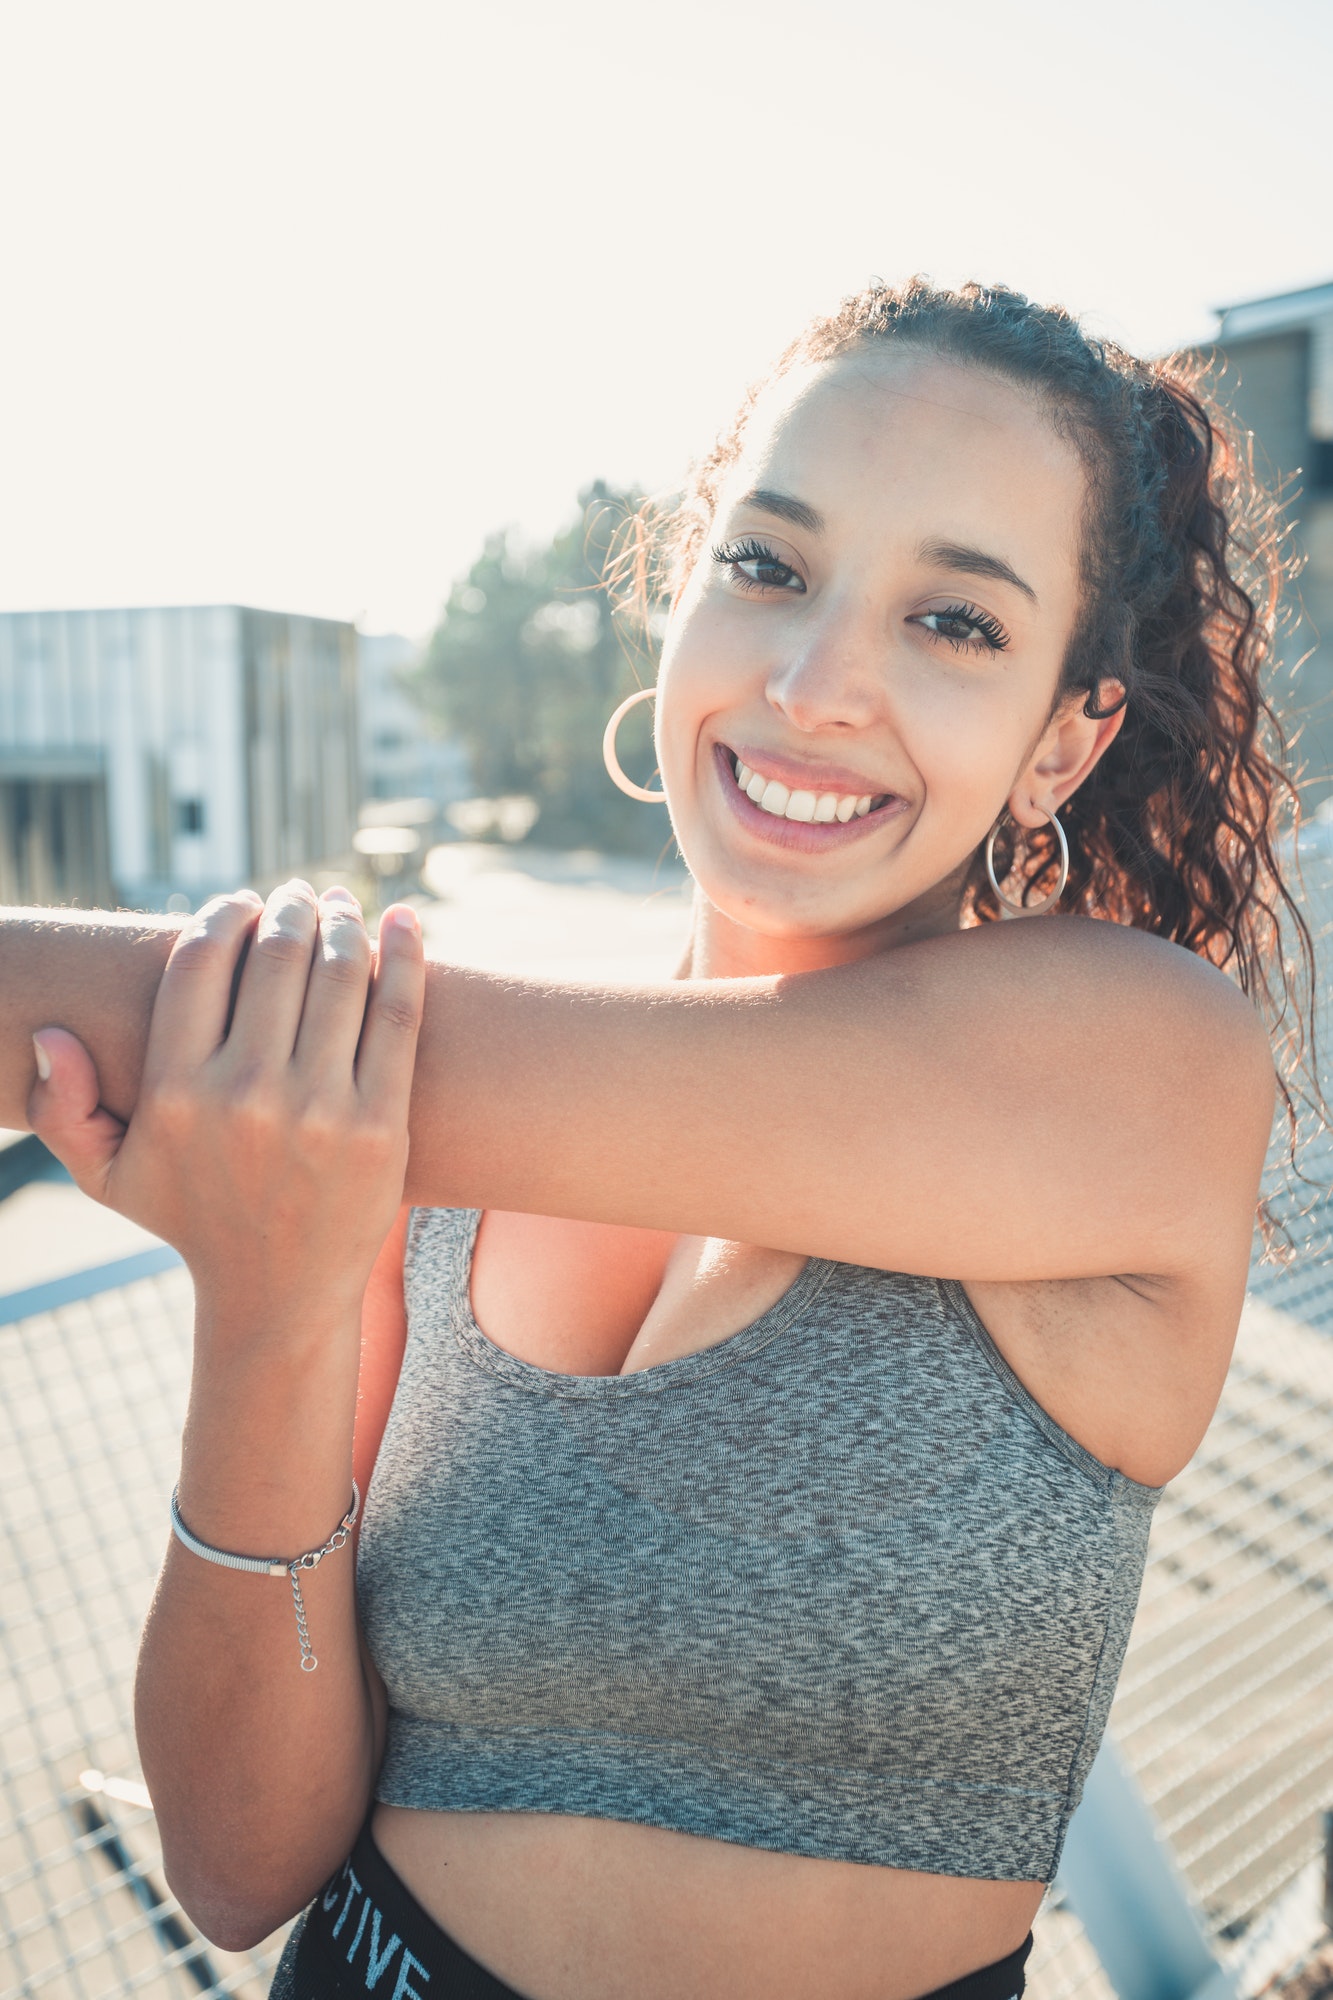 African sports woman standing stretching her arms while smiling to camera urban